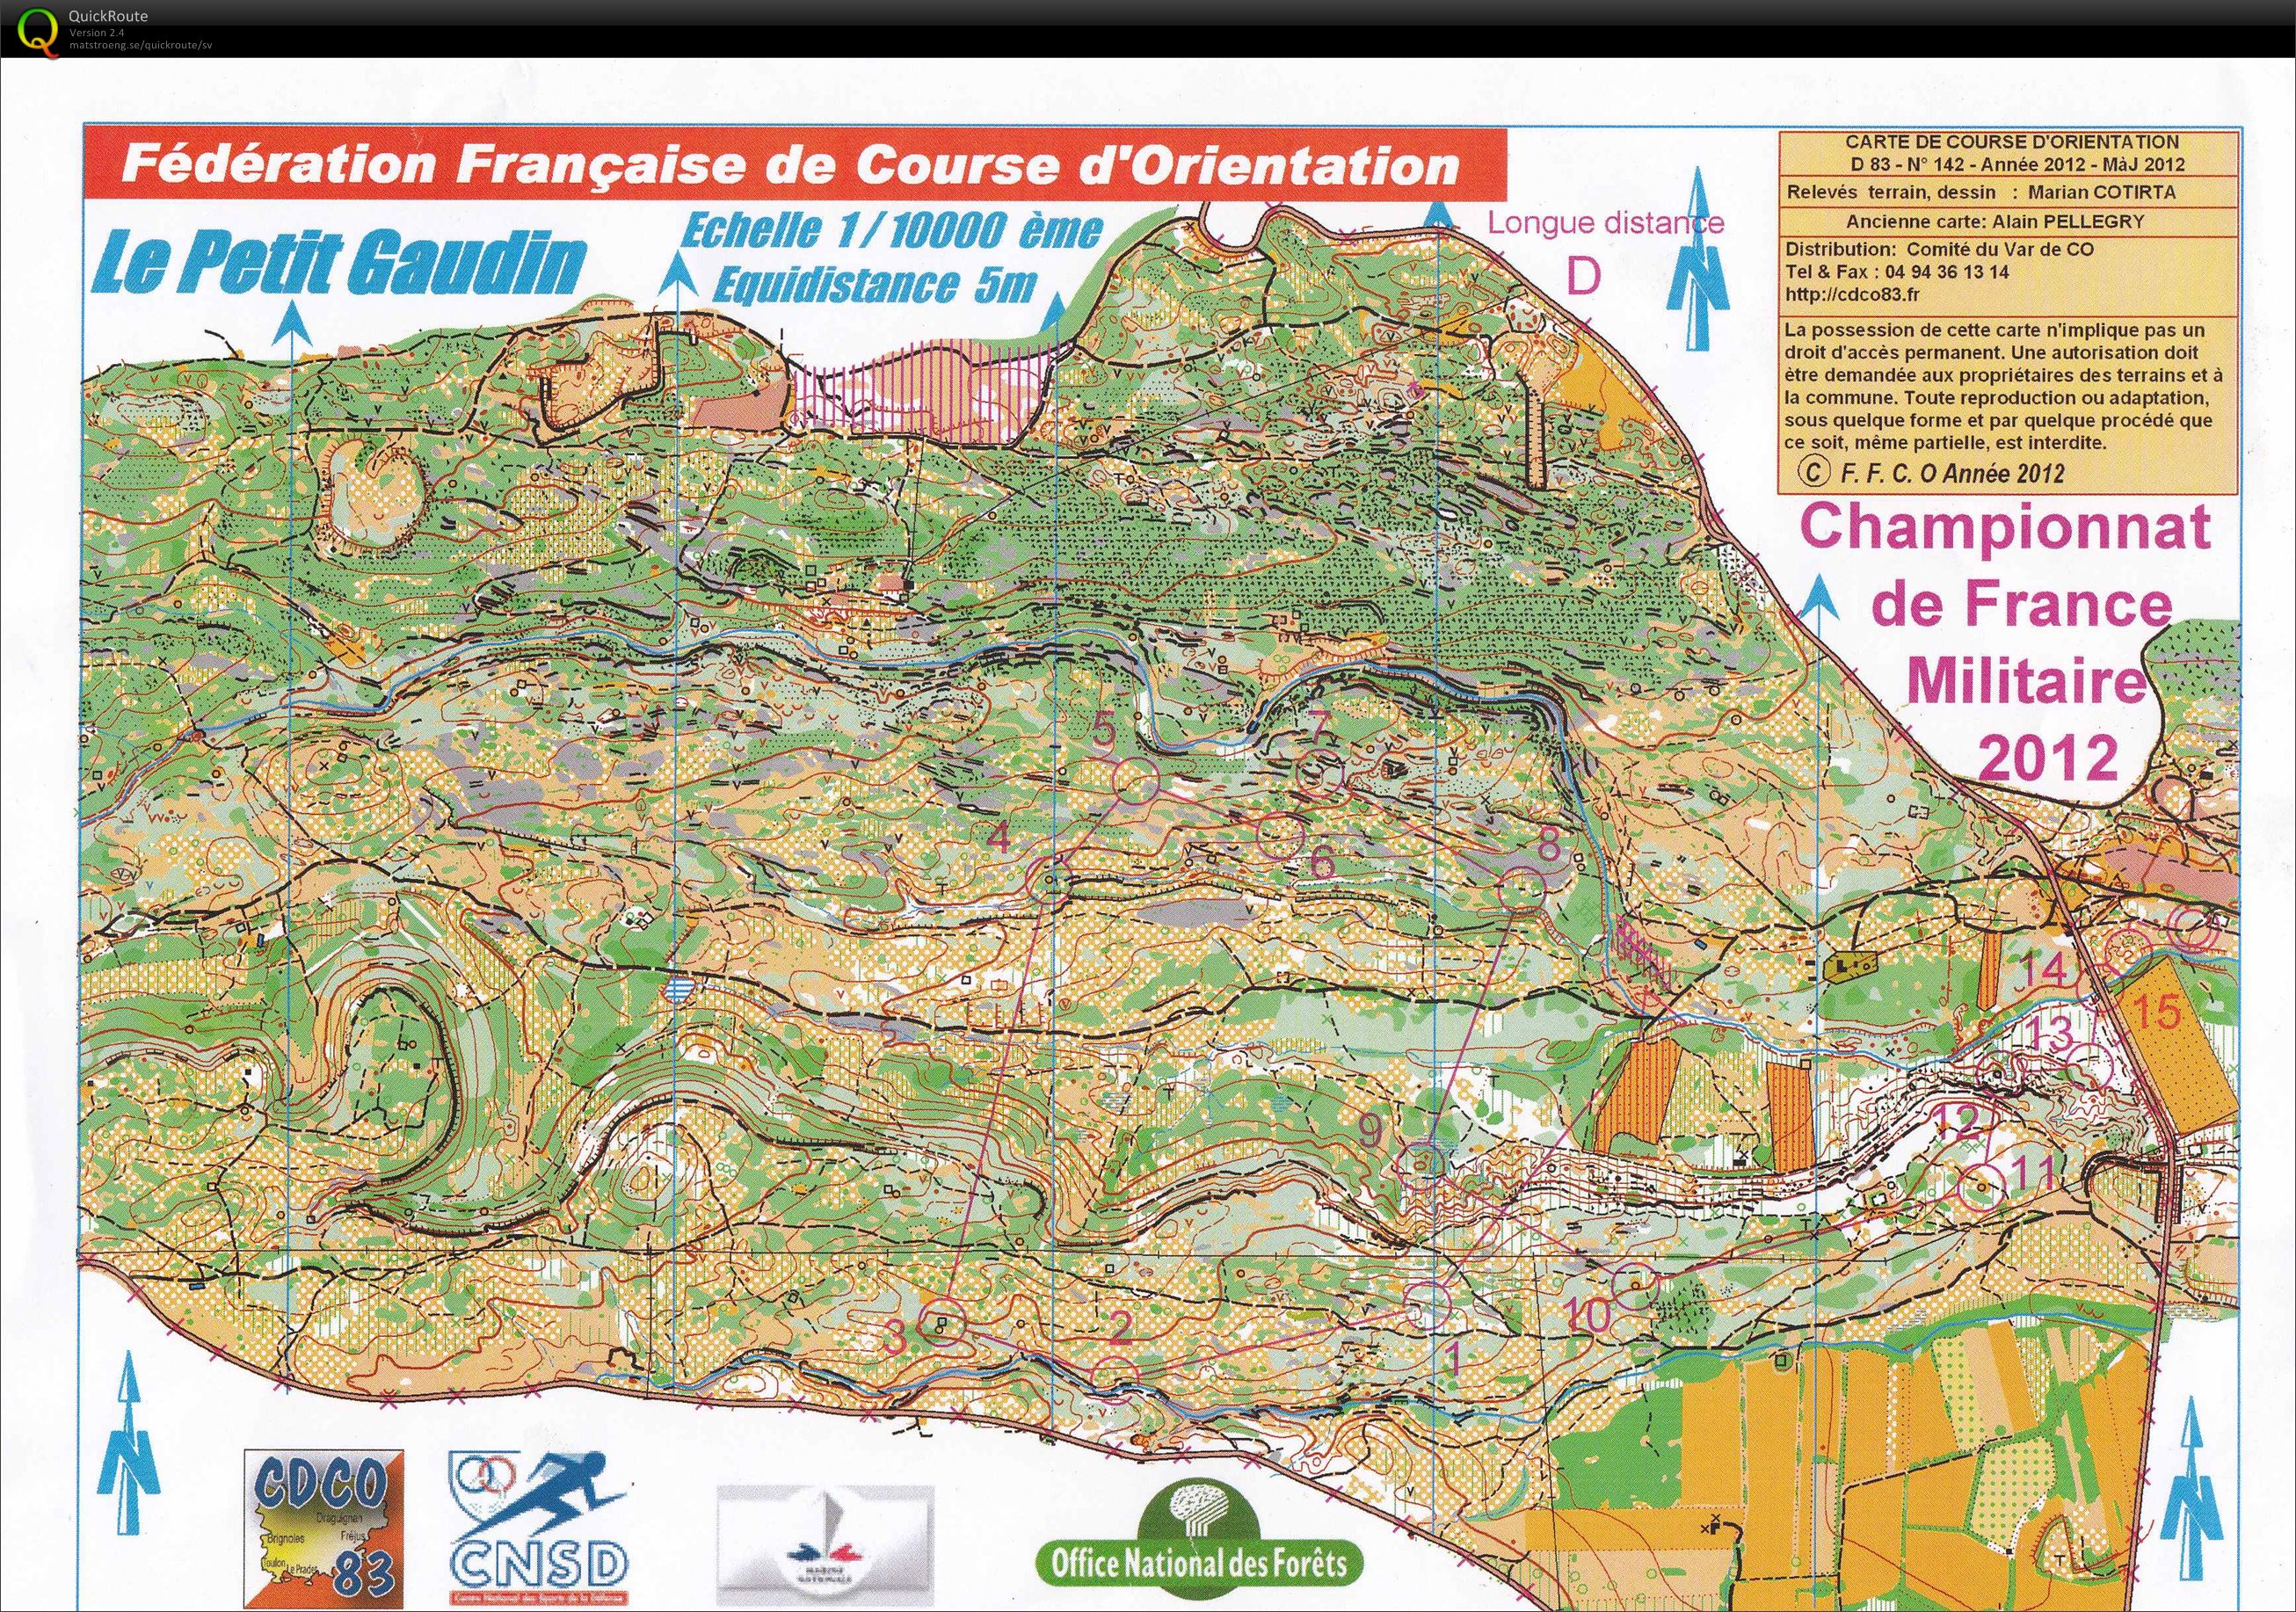 Open race after French Military long dist champ H60 (11-05-2012)